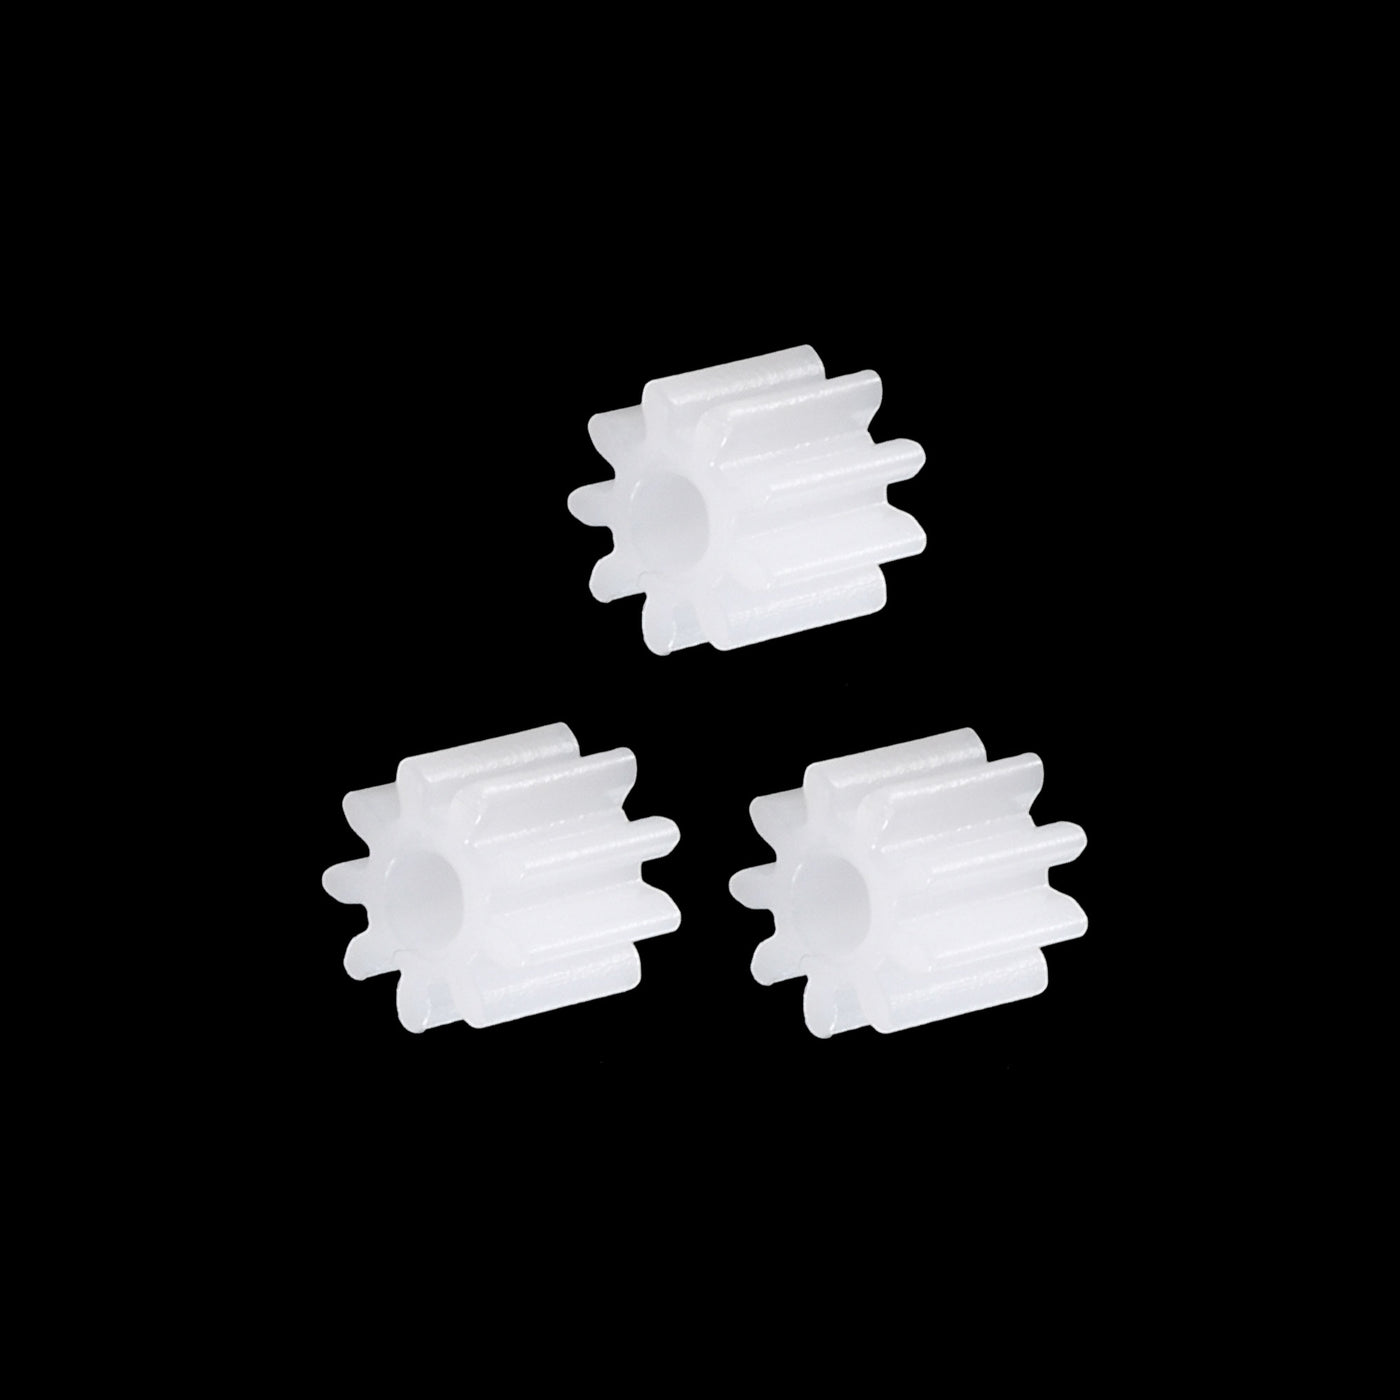 uxcell Uxcell 30Pcs 092A Plastic Gear Accessories with 9 Teeth for DIY Car Robot Motor